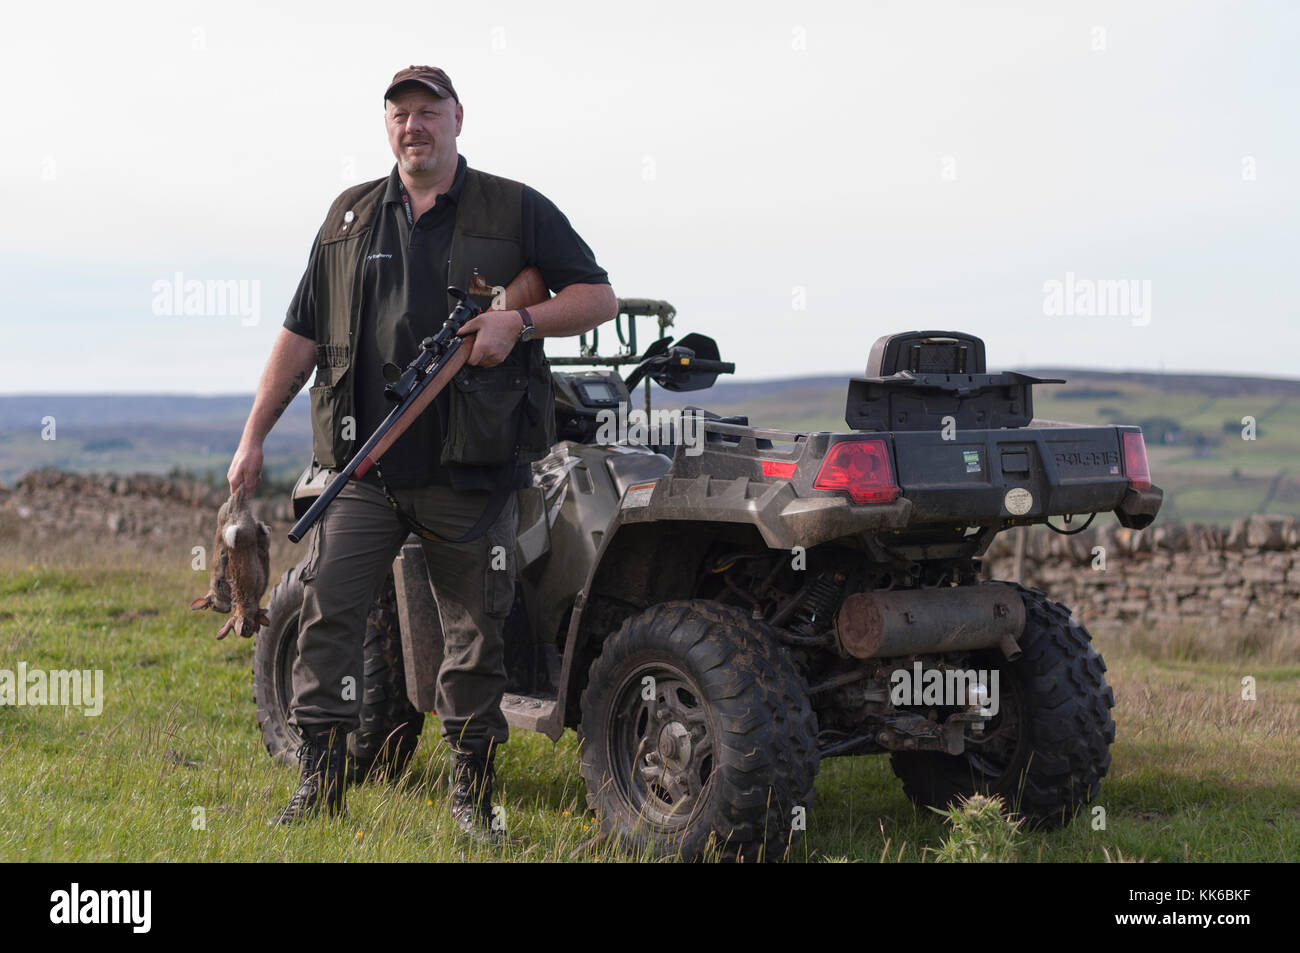 A man out doing rabbit control on a farm in Weardale, County Durham with a .22 rifle, and using a quad (ATV) for transport. Stock Photo